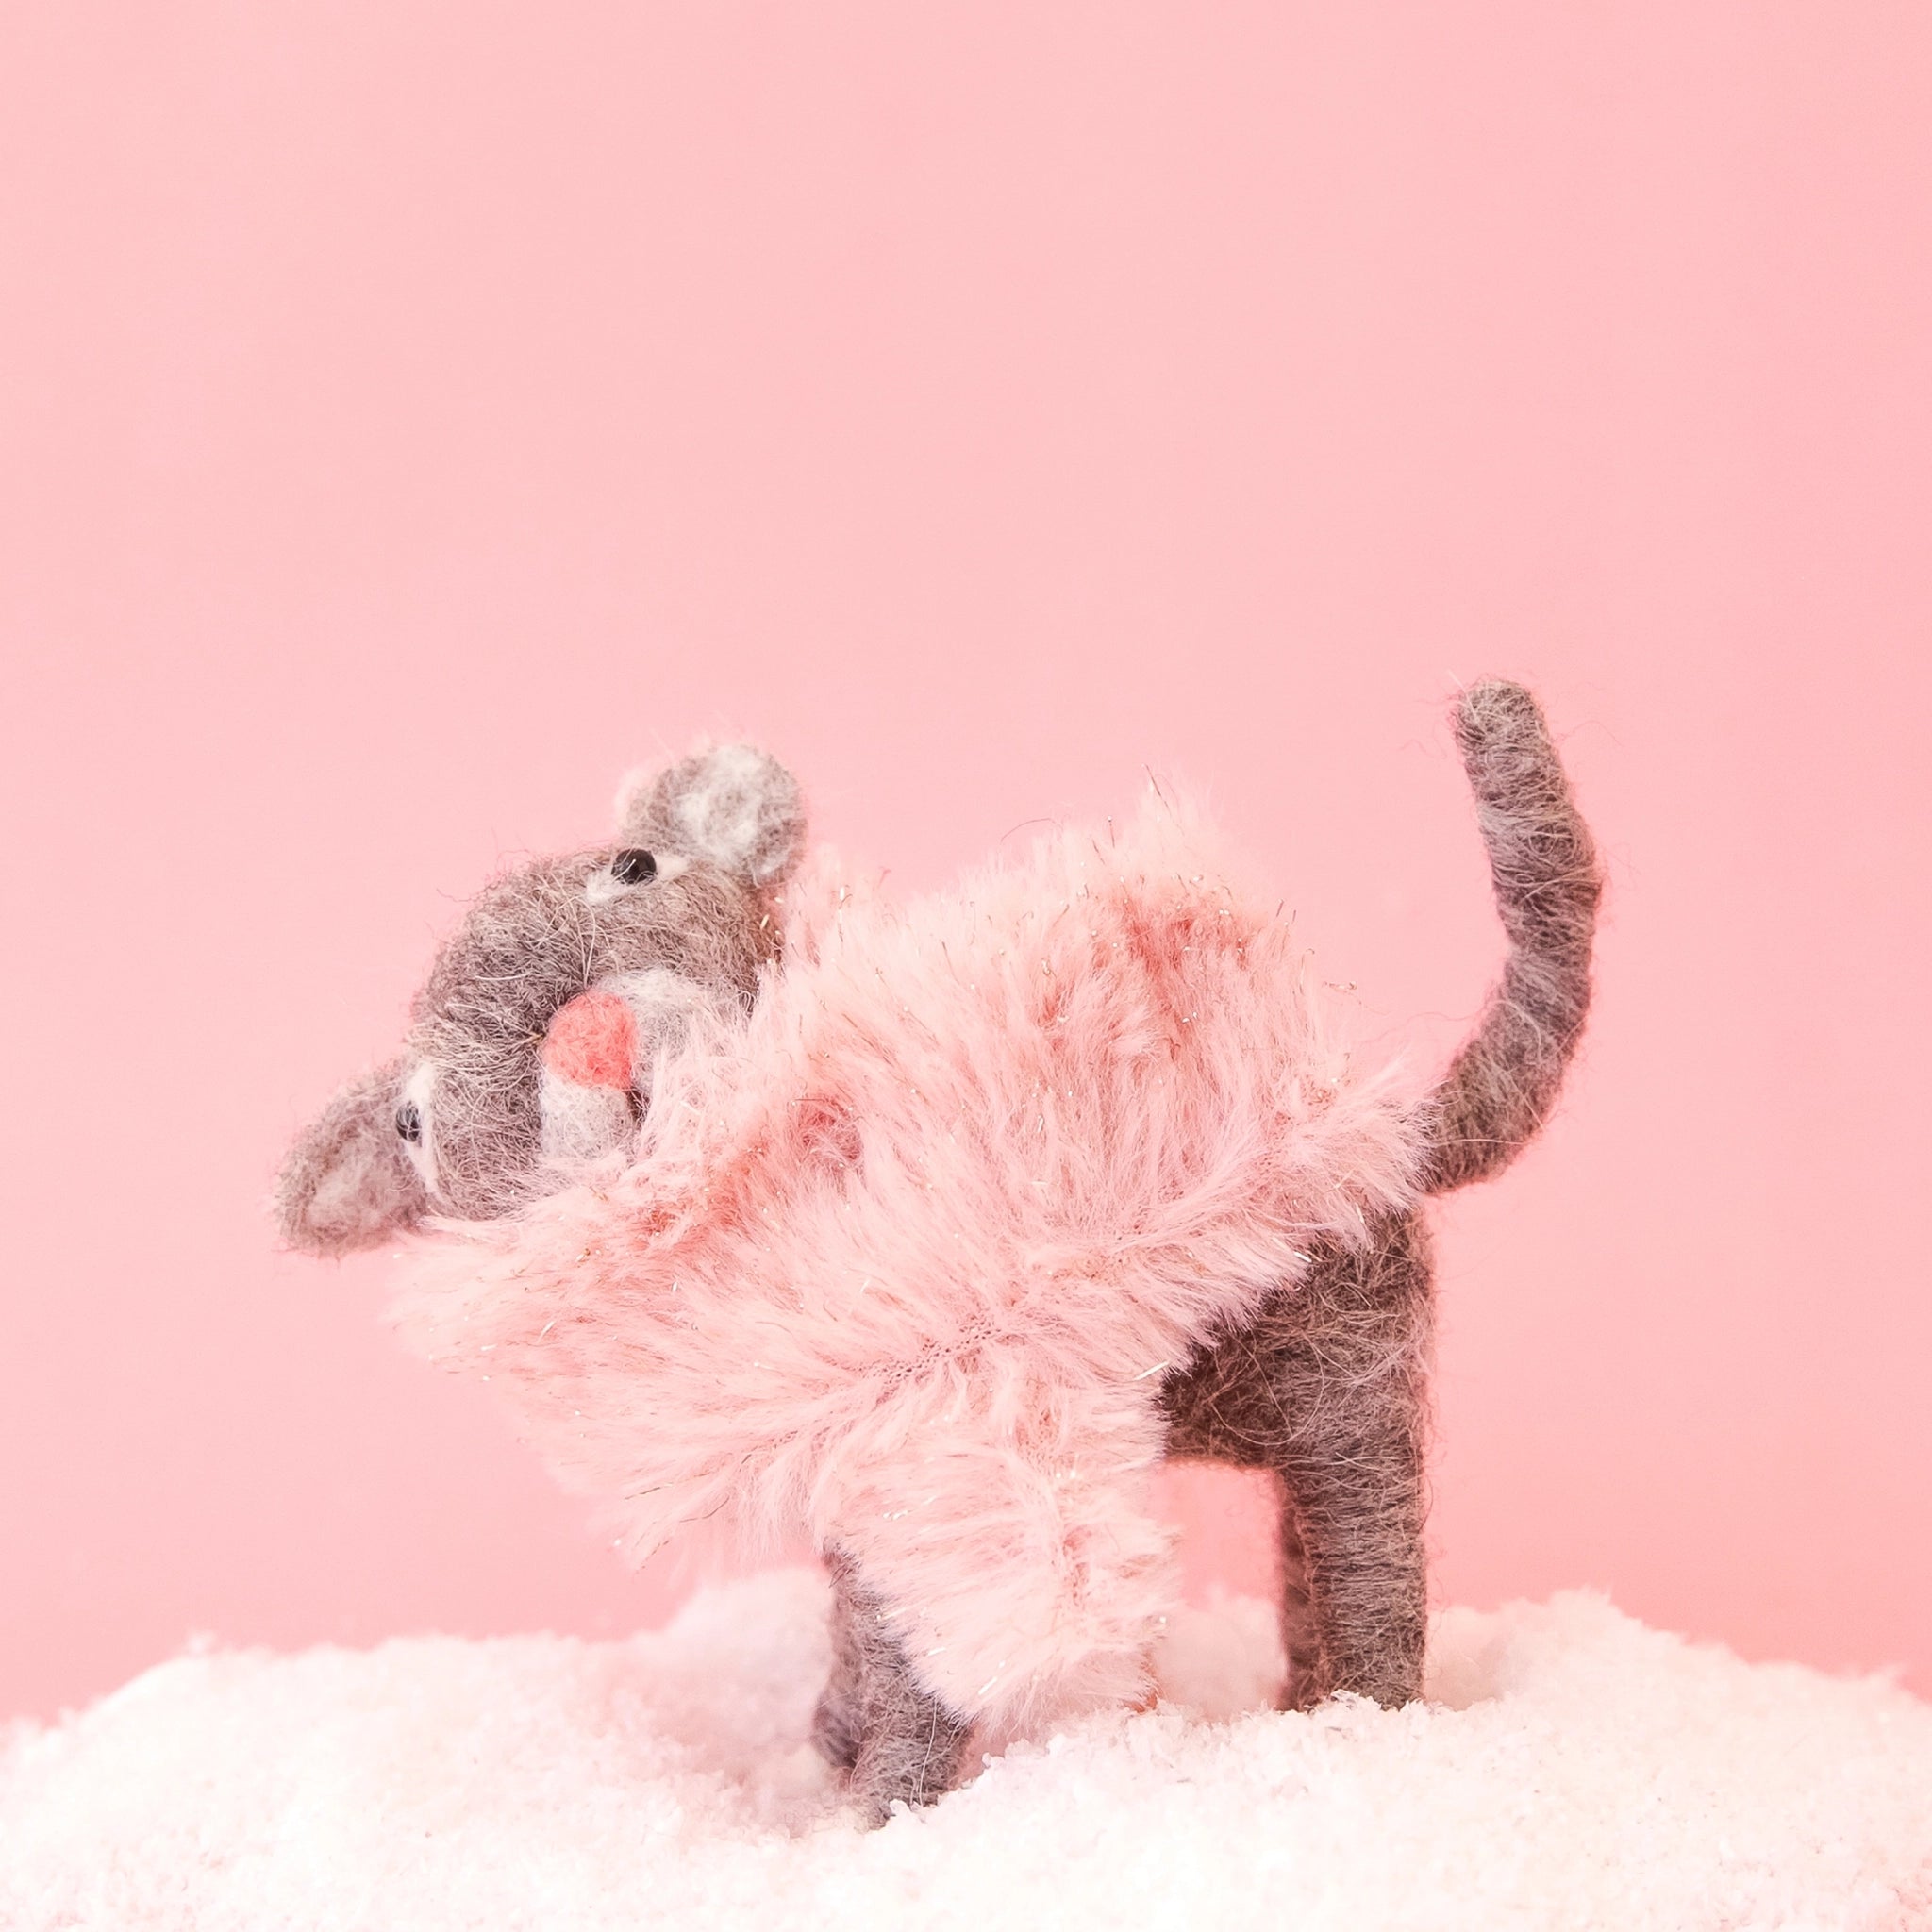 On a pink background is a brown felt cat ornament with a pink fluffy faux fur scarf.